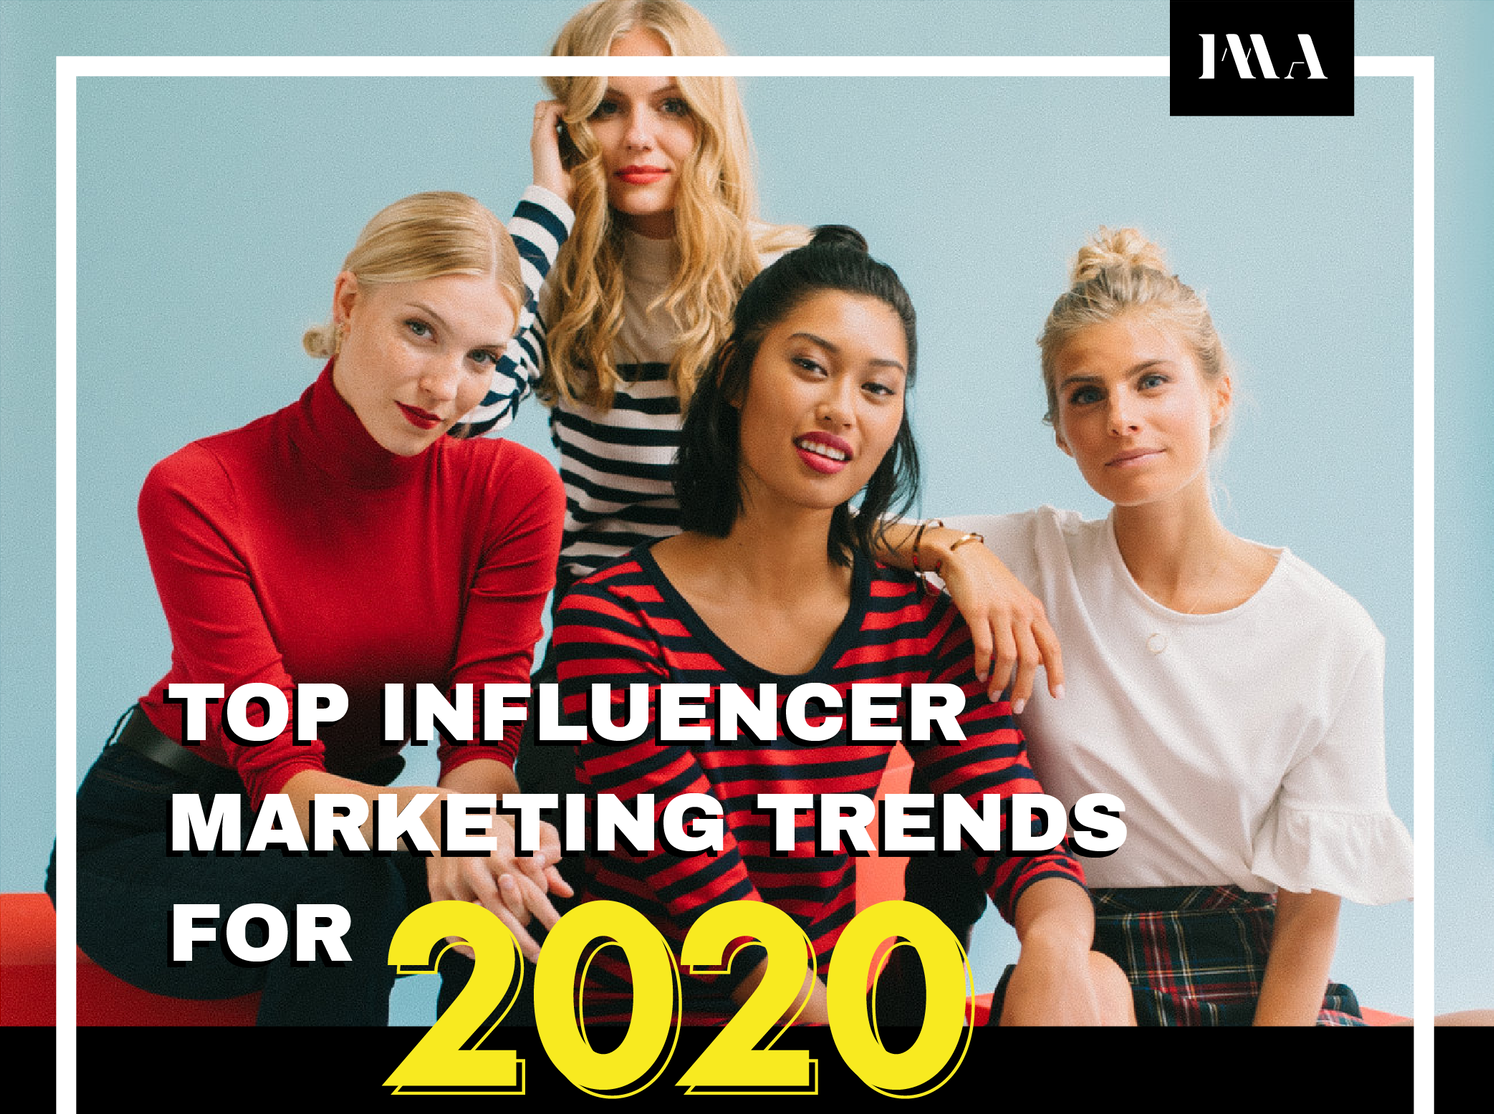 Infographic: Top Influencer Marketing Trends for 2020